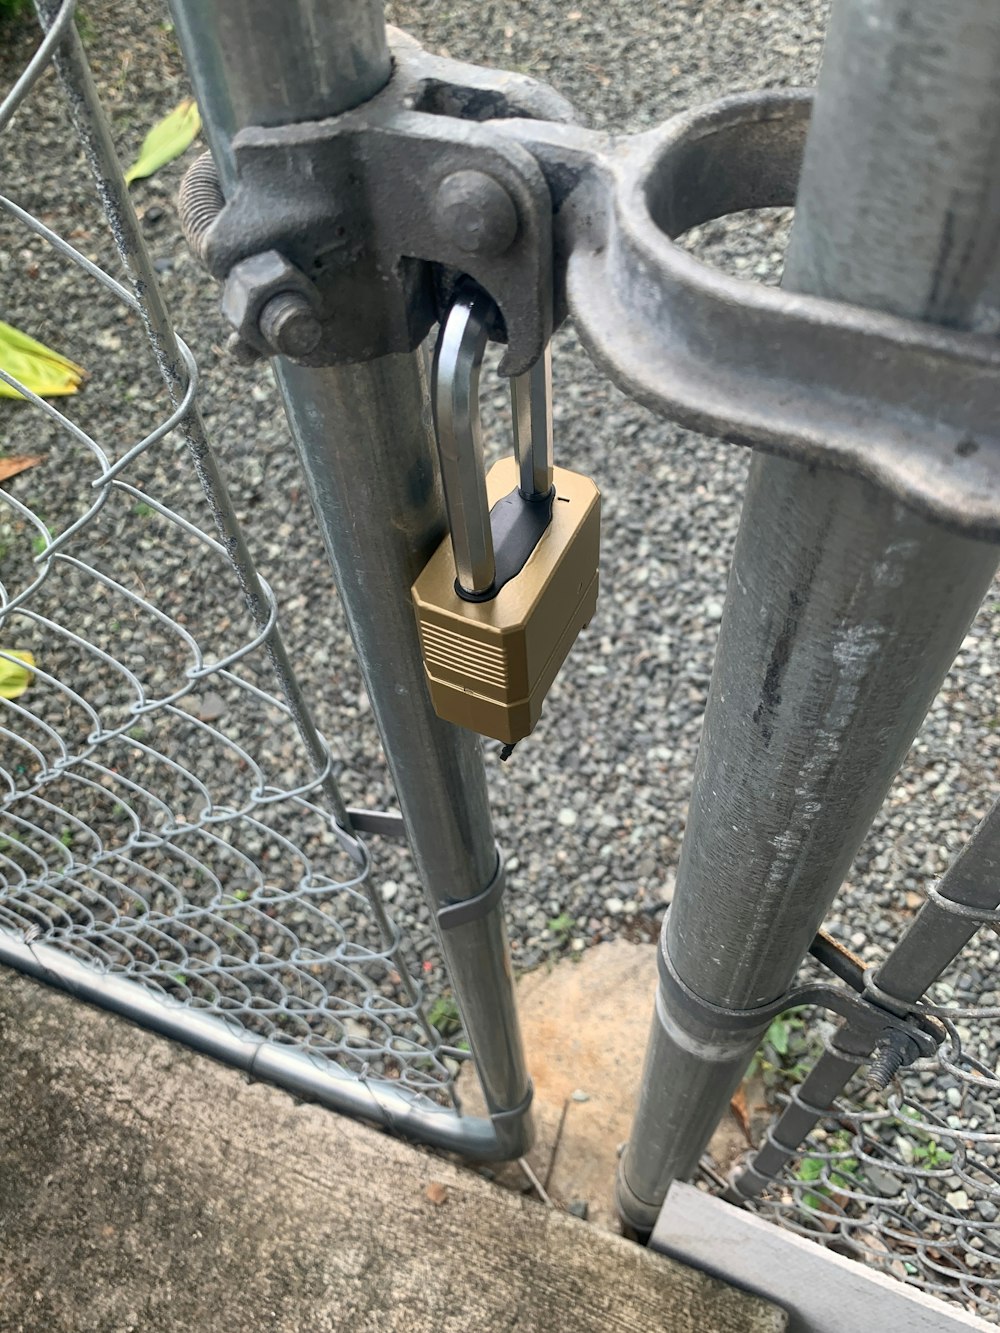 a padlock attached to a metal gate